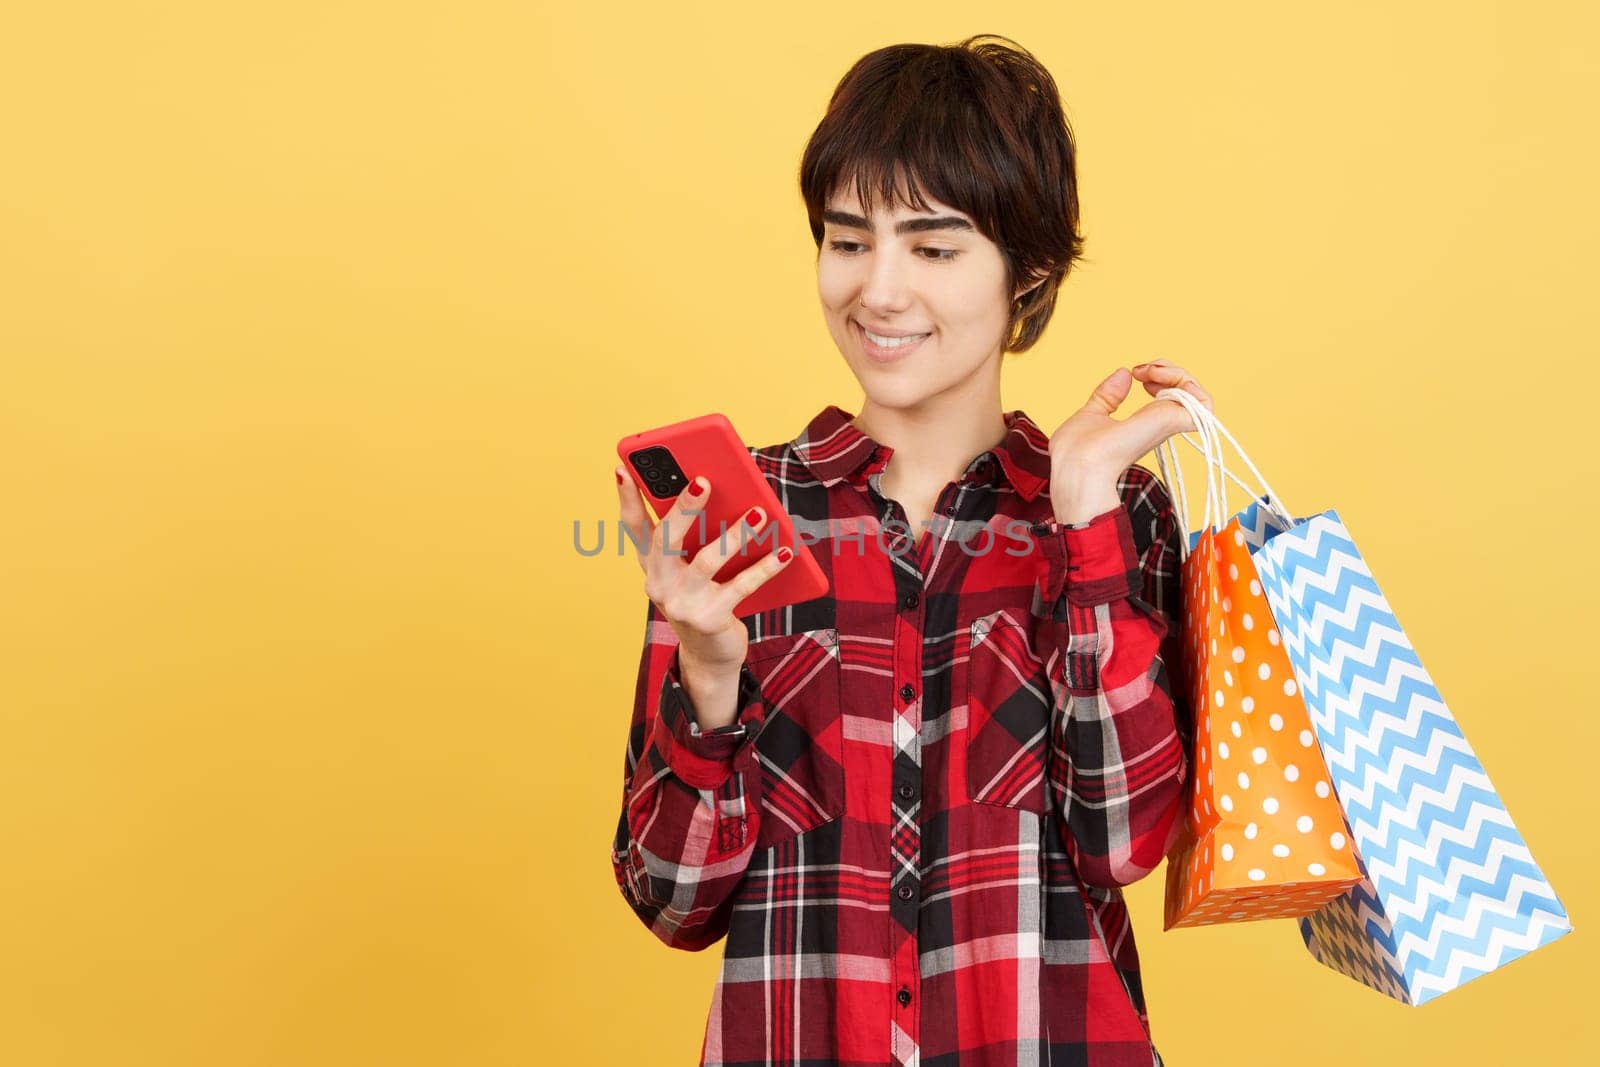 Androgynous person using a mobile while holding shopping bags by ivanmoreno